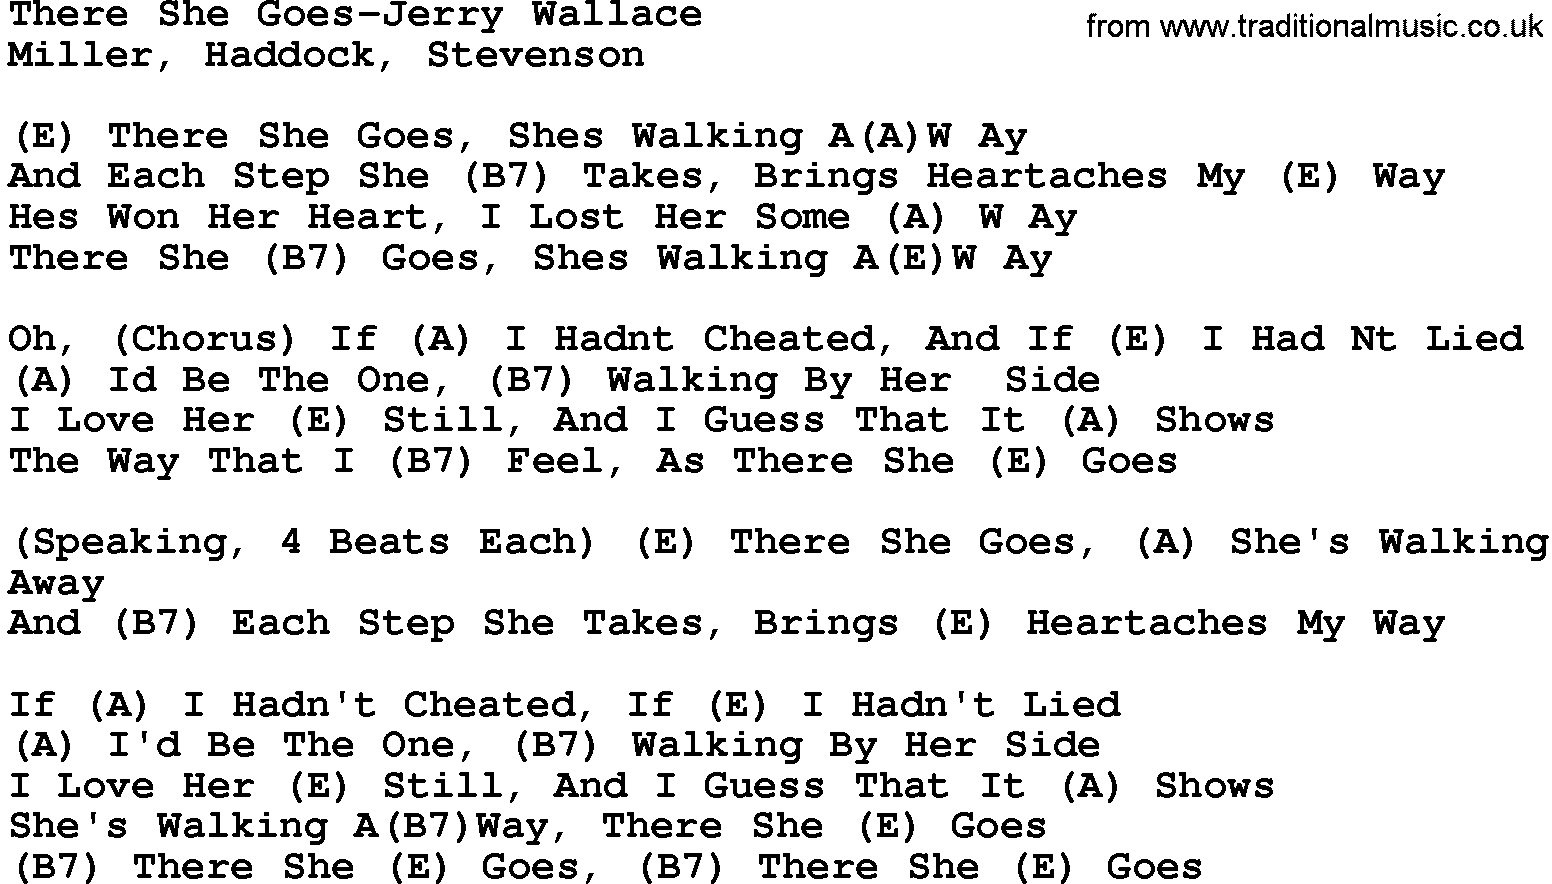 Country music song: There She Goes-Jerry Wallace lyrics and chords